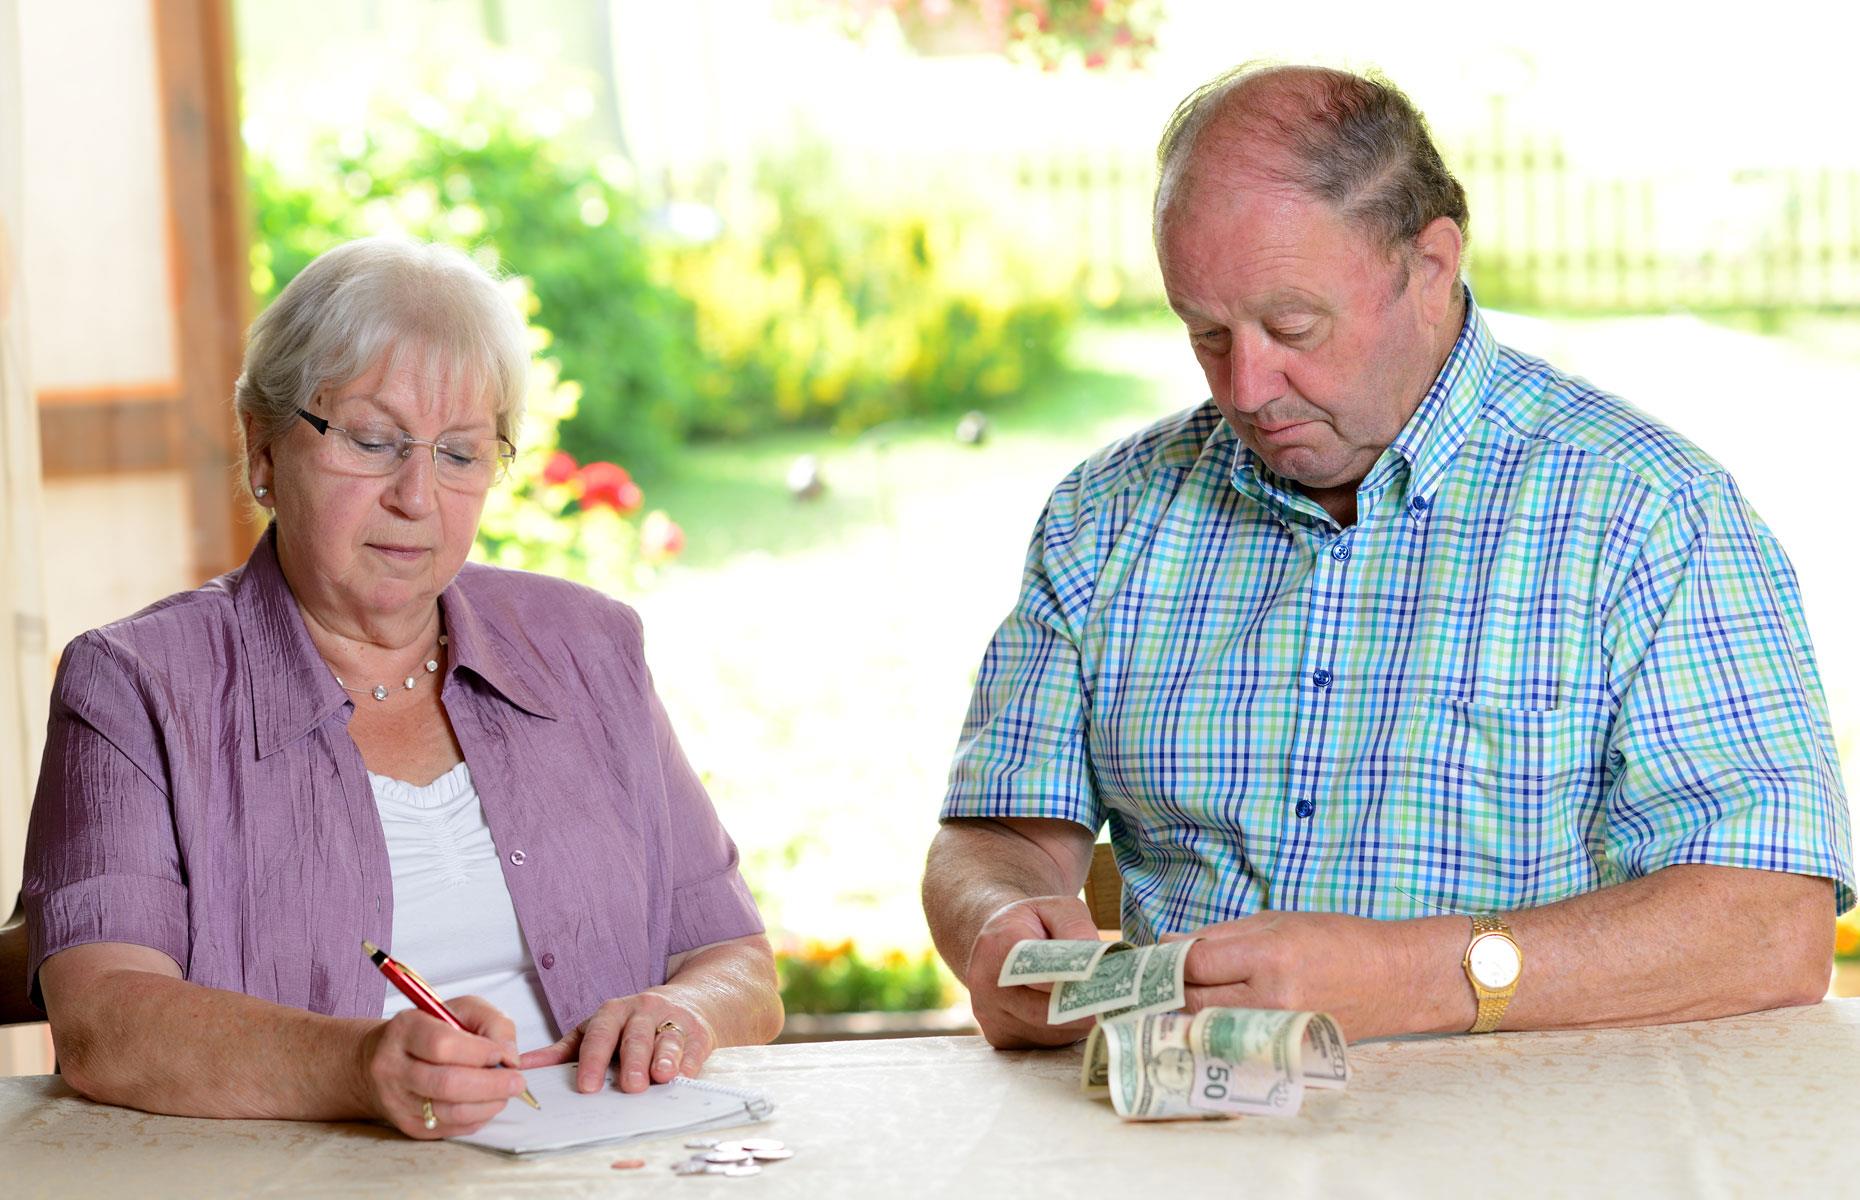 40% of older Americans depend entirely on Social Security for retirement income 